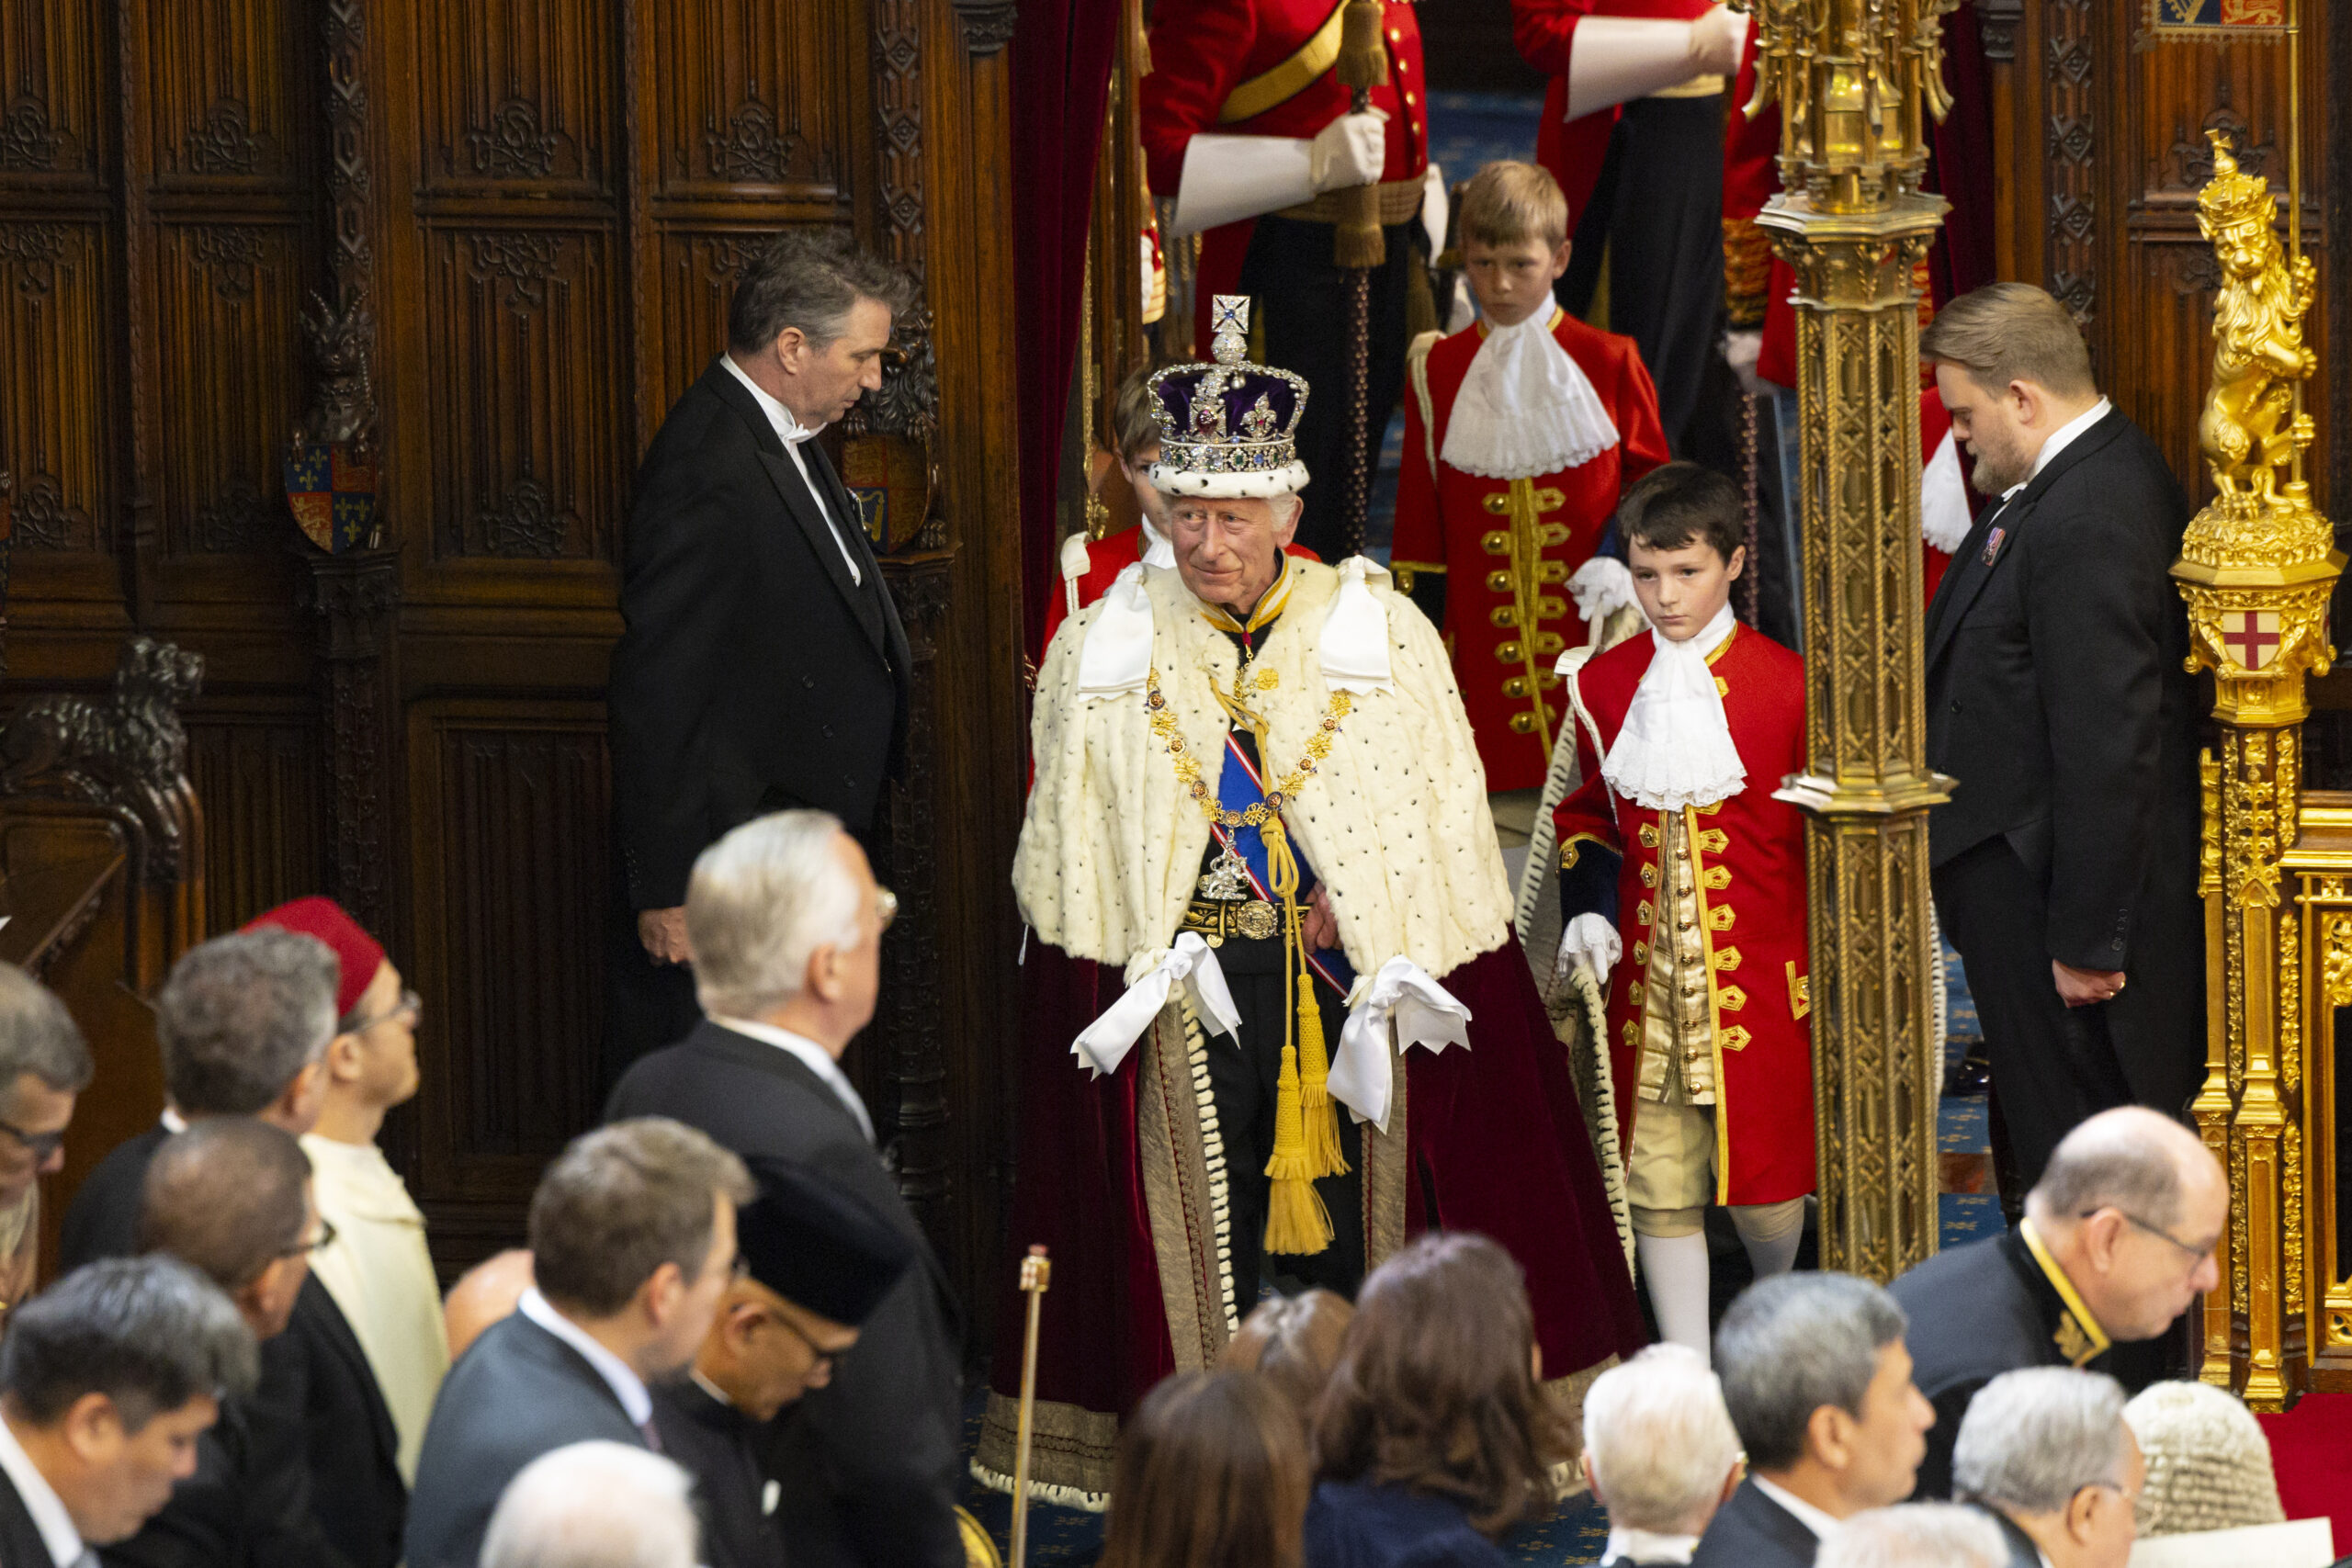 The historic crown King Charles wore to the State Opening of Parliament